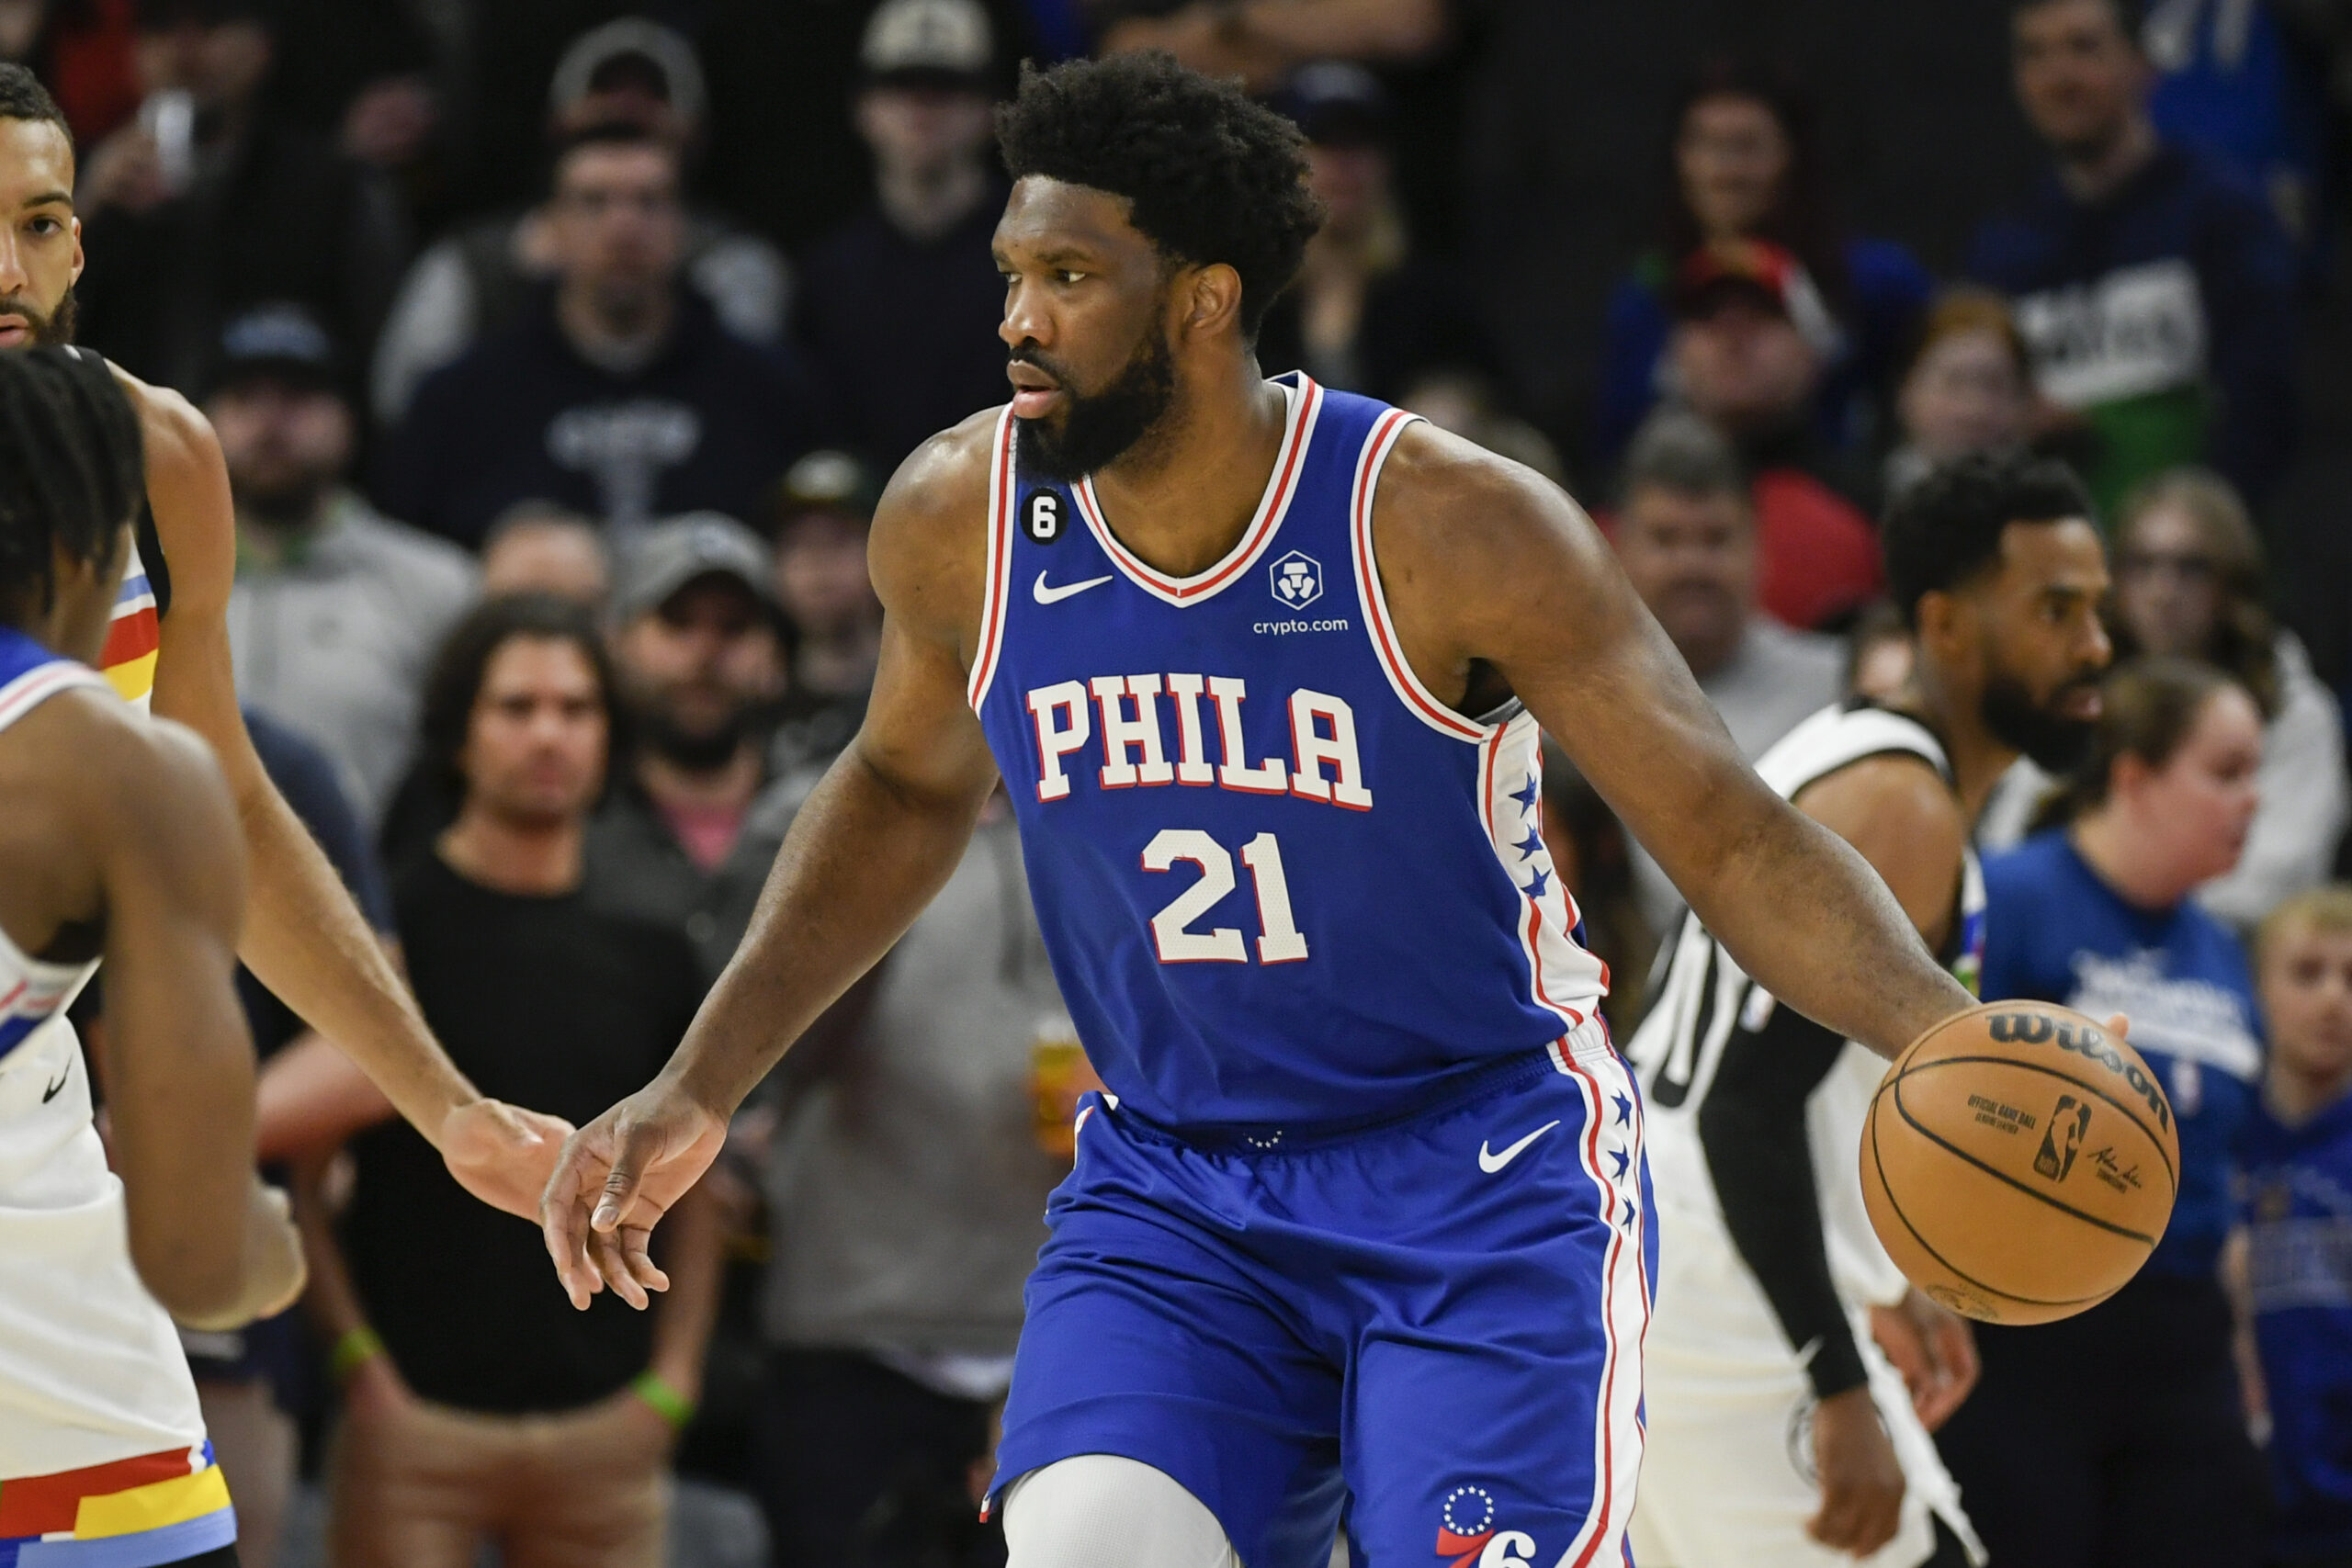 NBA Africa Game highlight: Joel Embiid gets steal, goes coast-to-coast